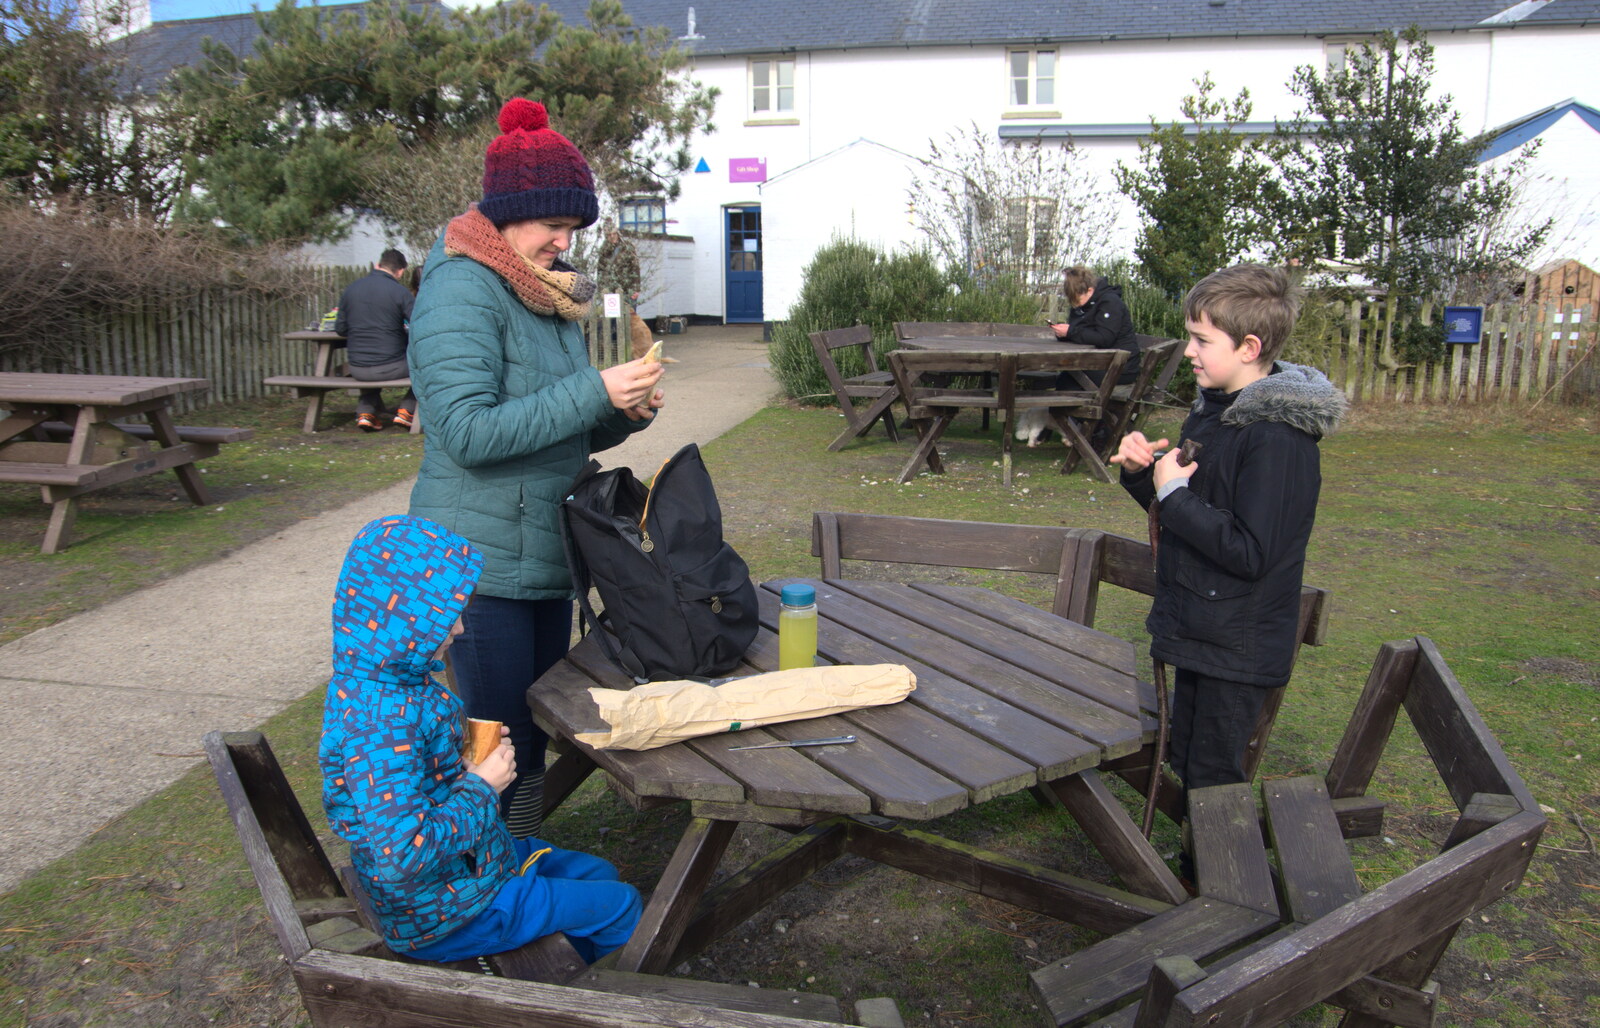 We stop for a quick picnic from A Trip to Dunwich Heath, Dunwich, Suffolk - 17th February 2019